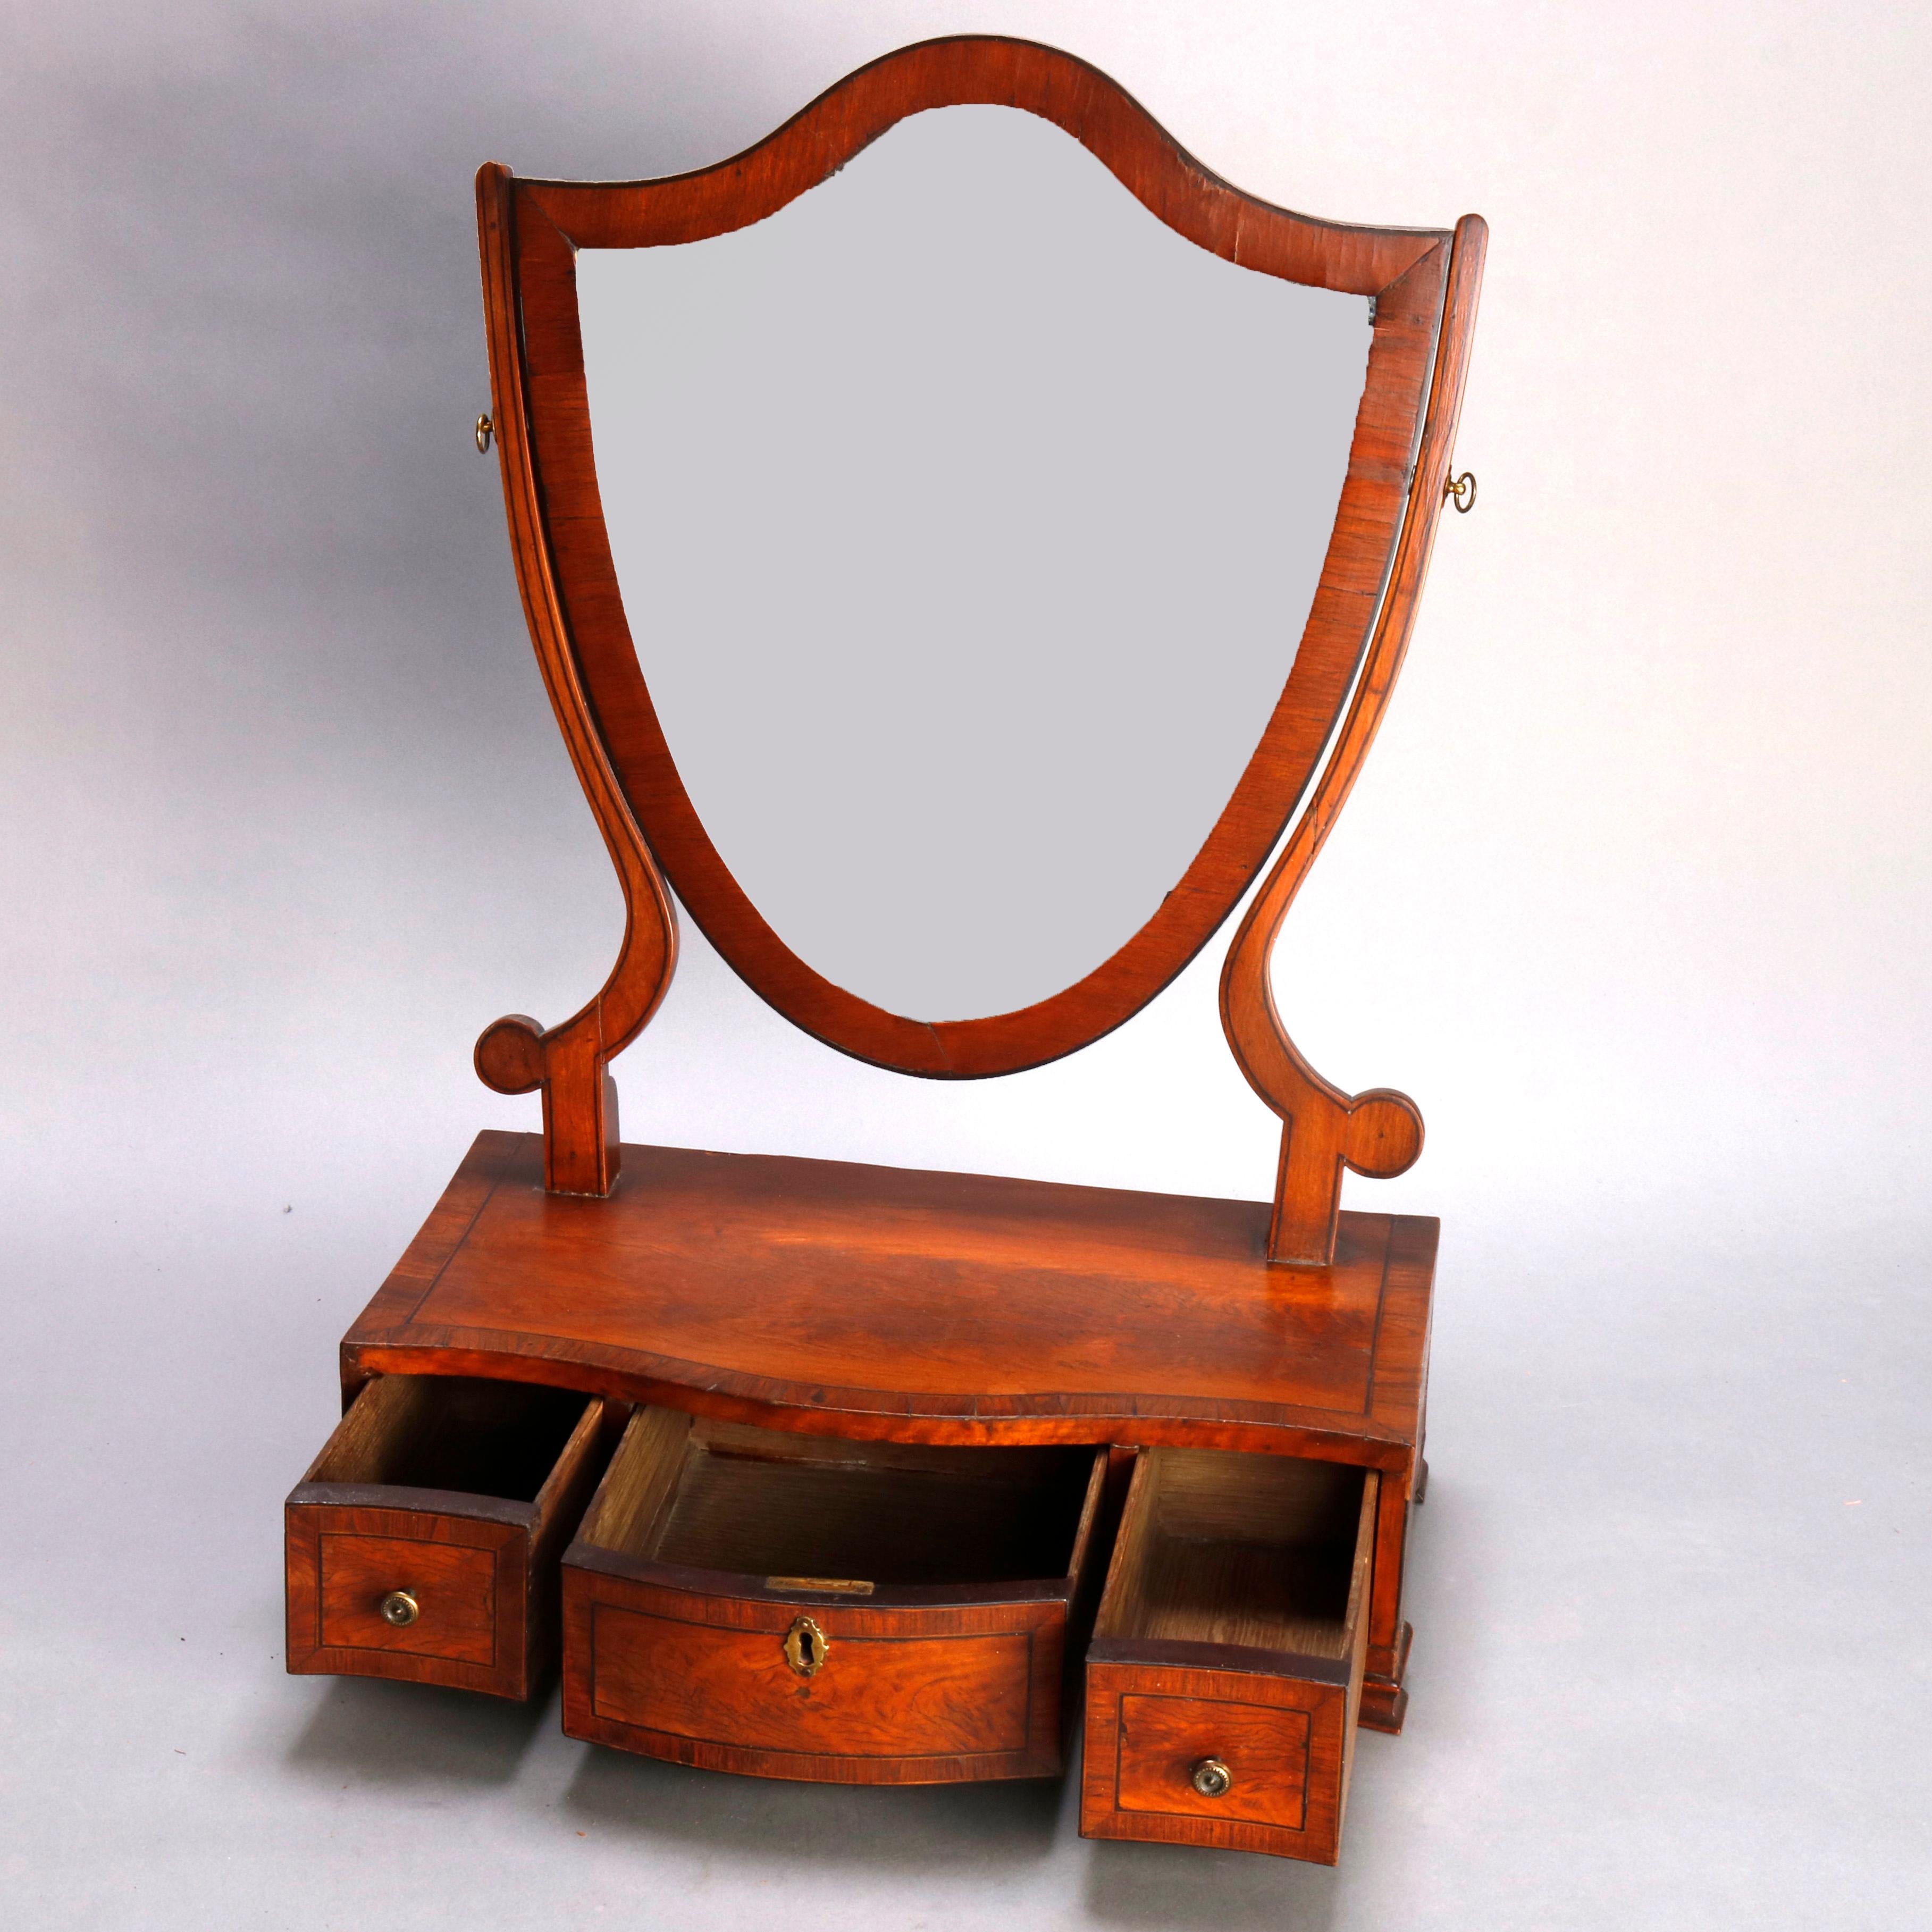 An antique English Georgian dresser shaving mirror offers flame mahogany construction with shield form mirror surmounting crossbanded base with three drawers and raised on bracket feet, circa 1810

***DELIVERY NOTICE – Due to COVID-19 we are